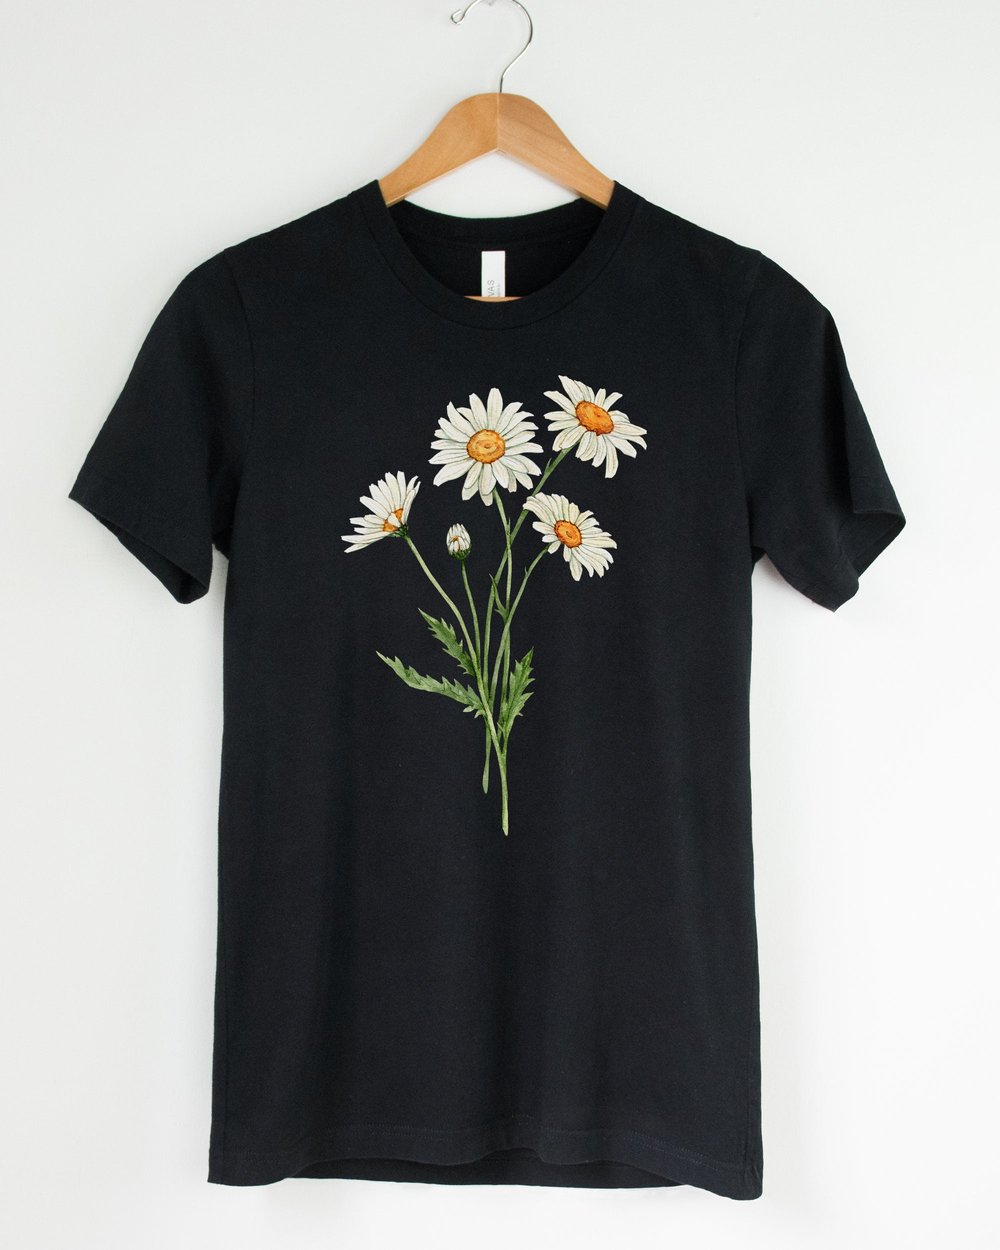 Birth Month Flowers Women's All Over Print T-Shirt – February